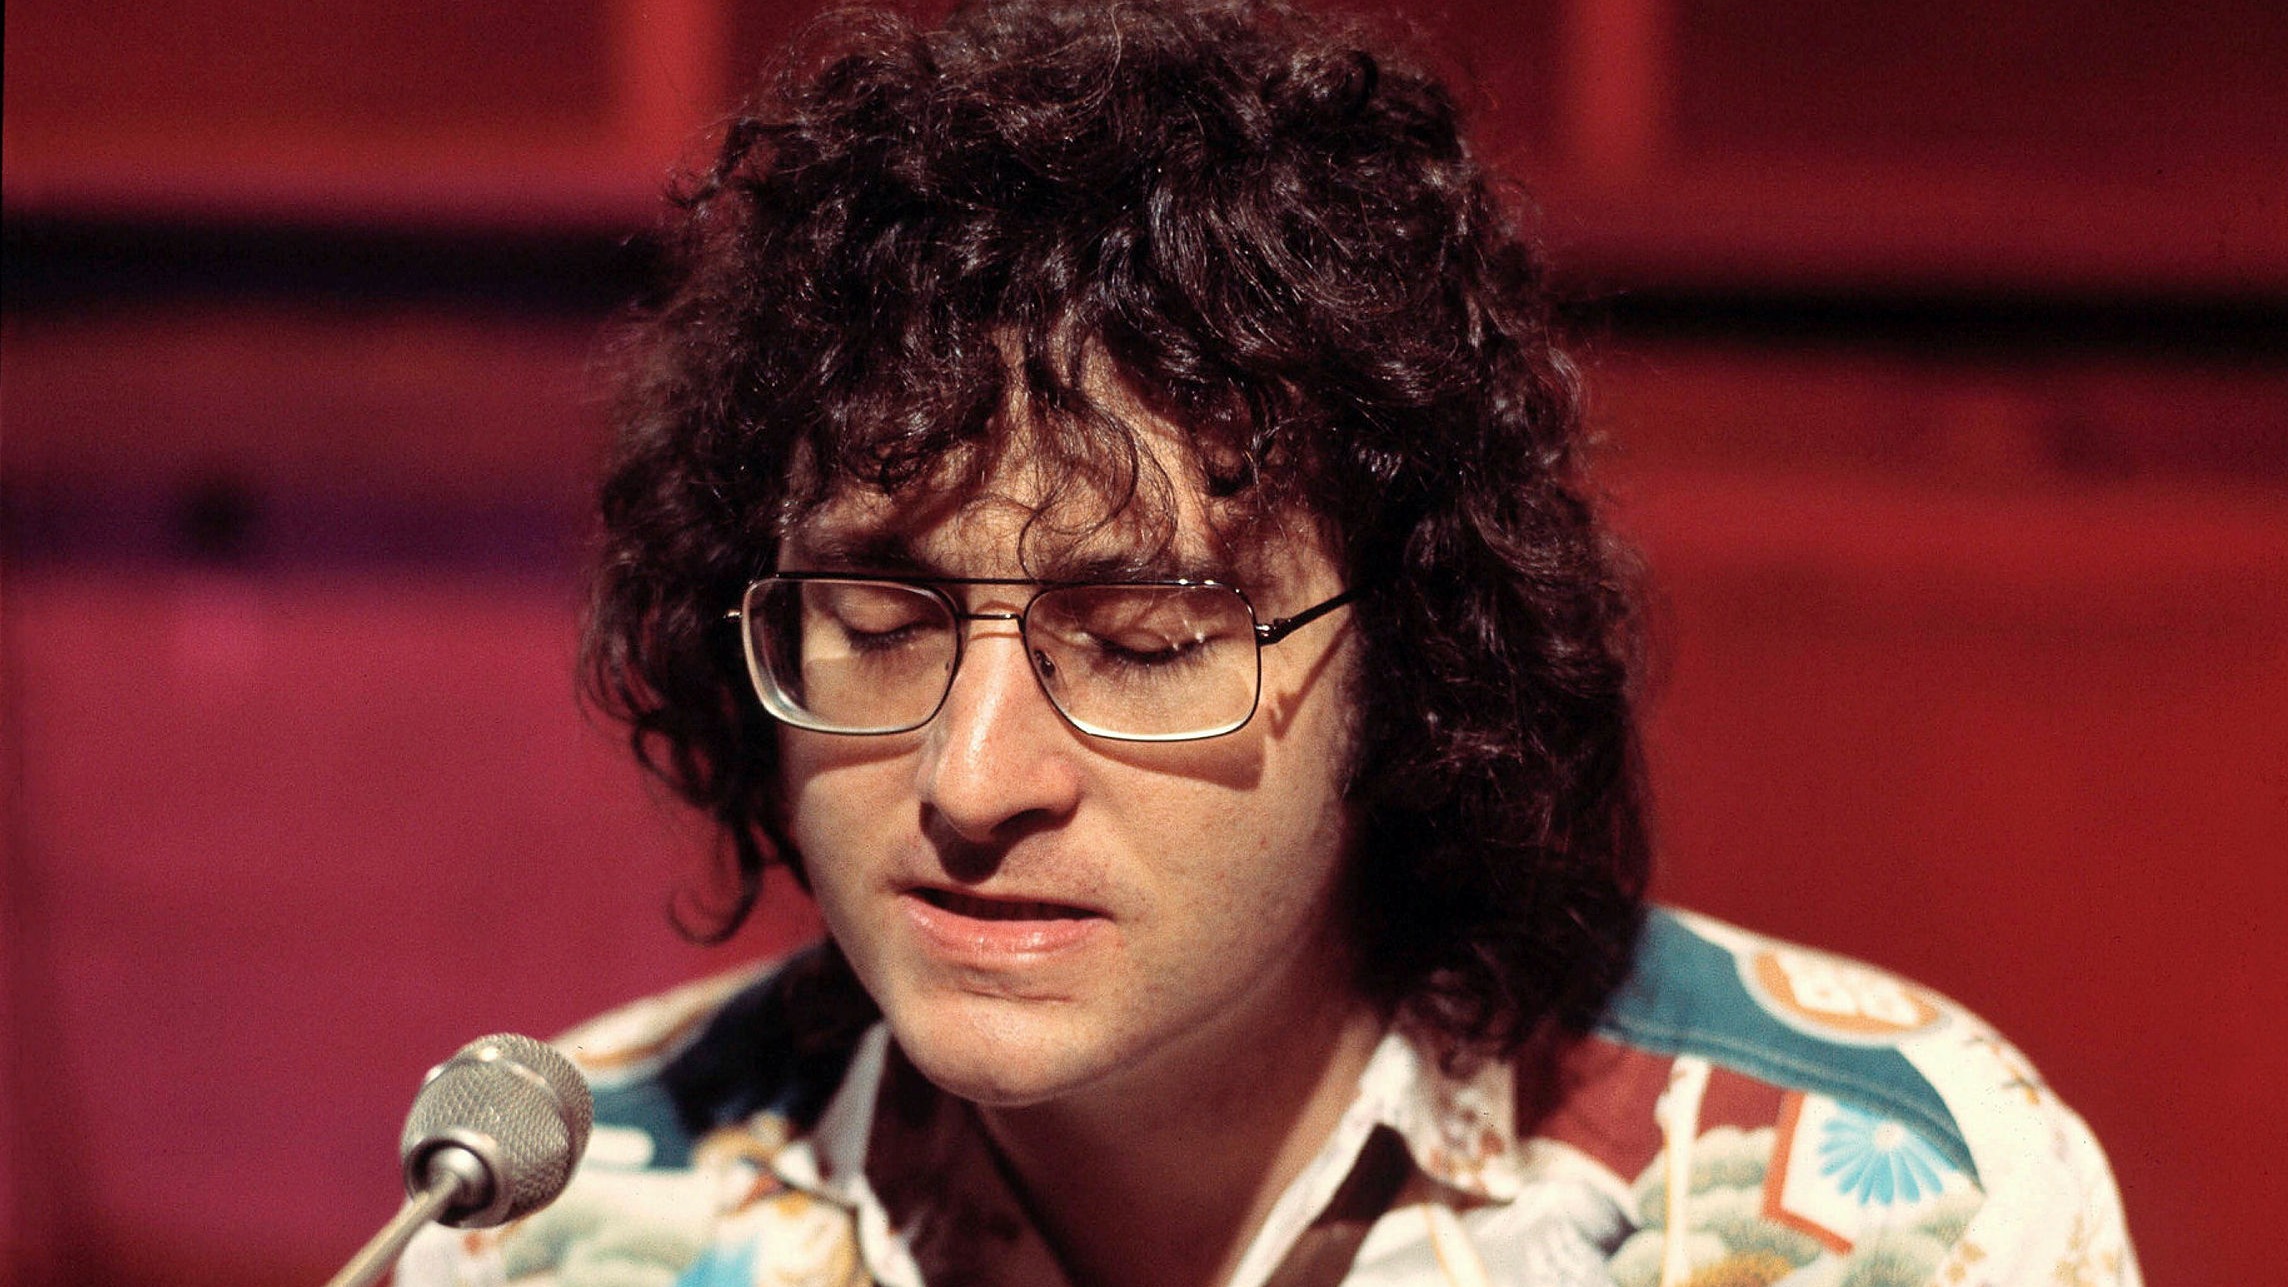 You Can Leave Your Hat On — how Randy Newman struck gold with sex — FT